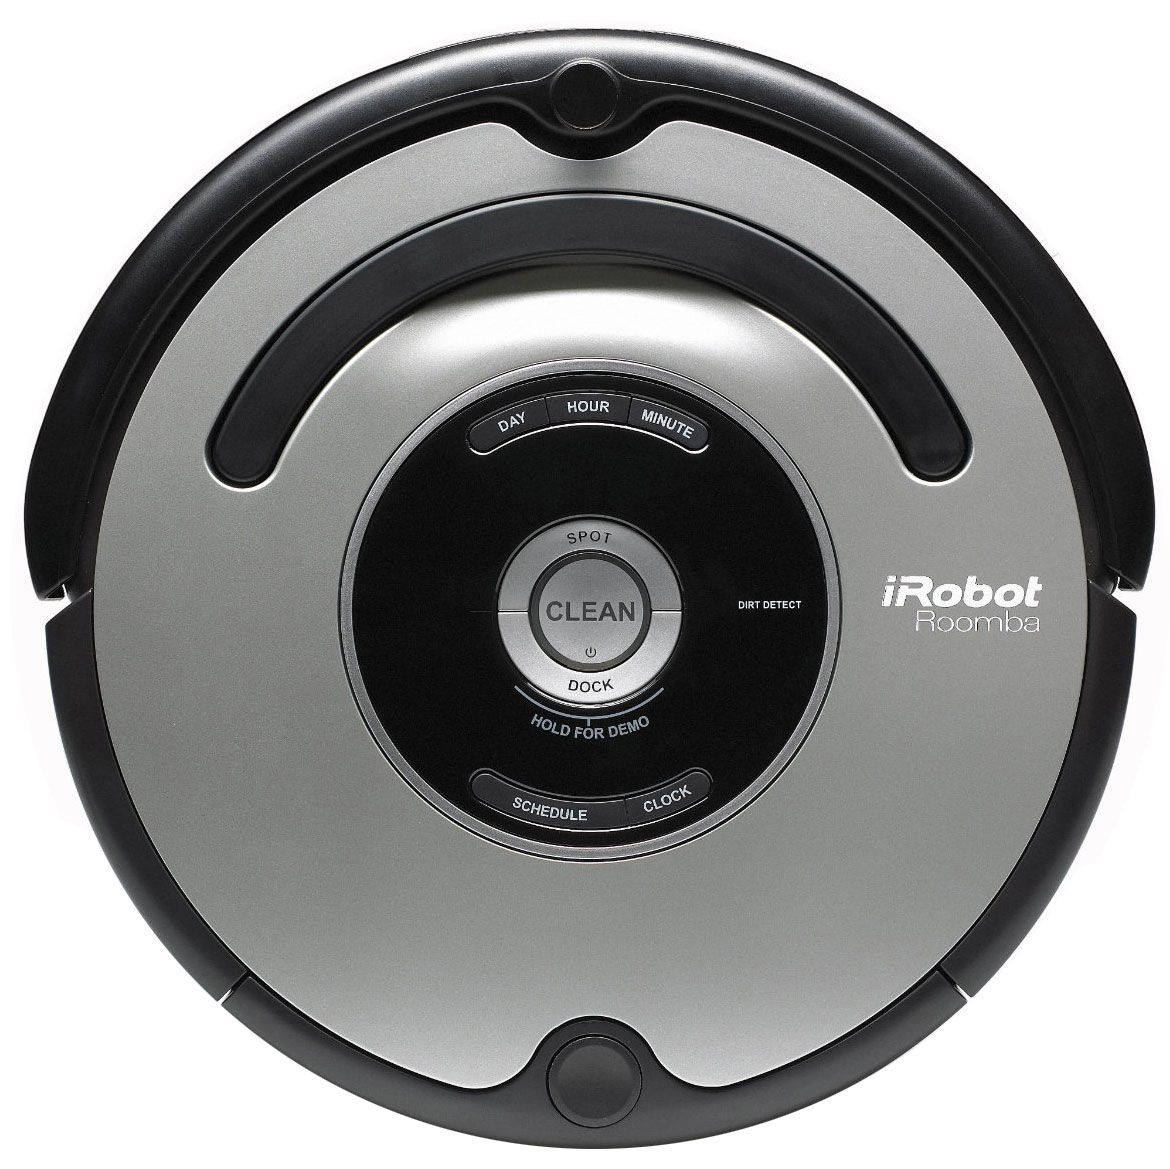 Spare parts and spare parts for iRobot Roomba 600